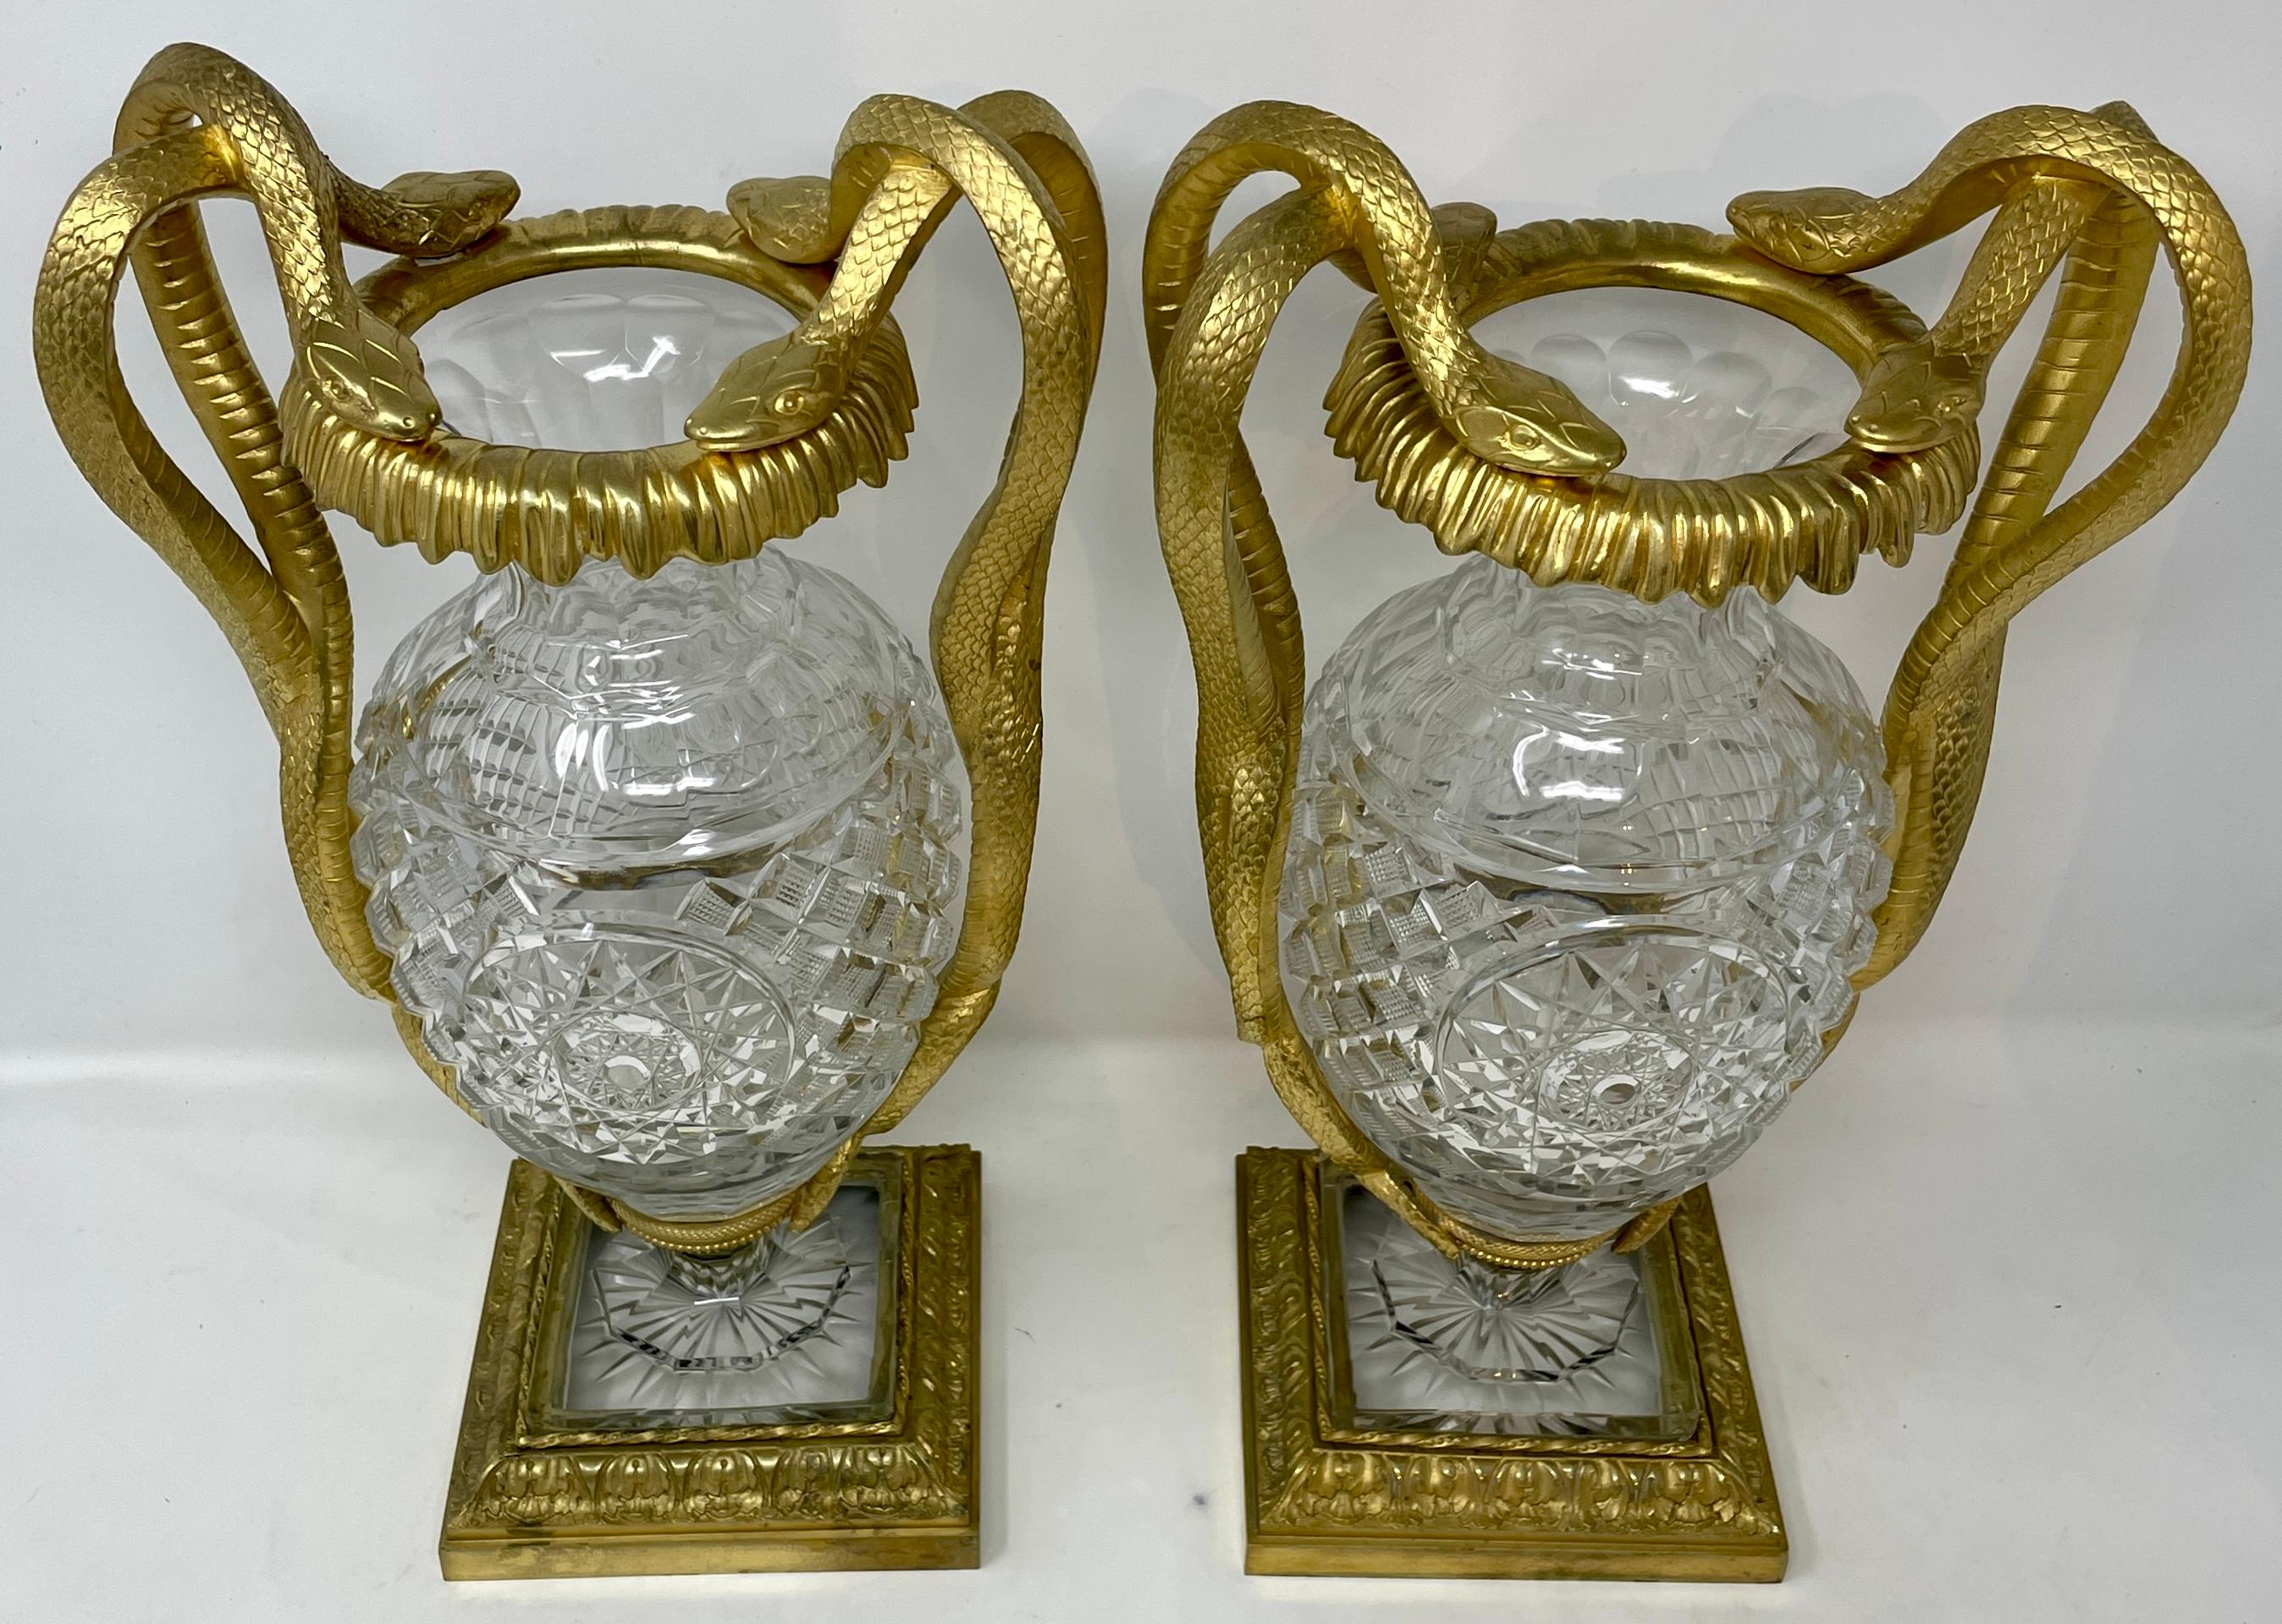 Pair antique French baccarat crystal vases with ormolu mounts, circa 1875-1880.